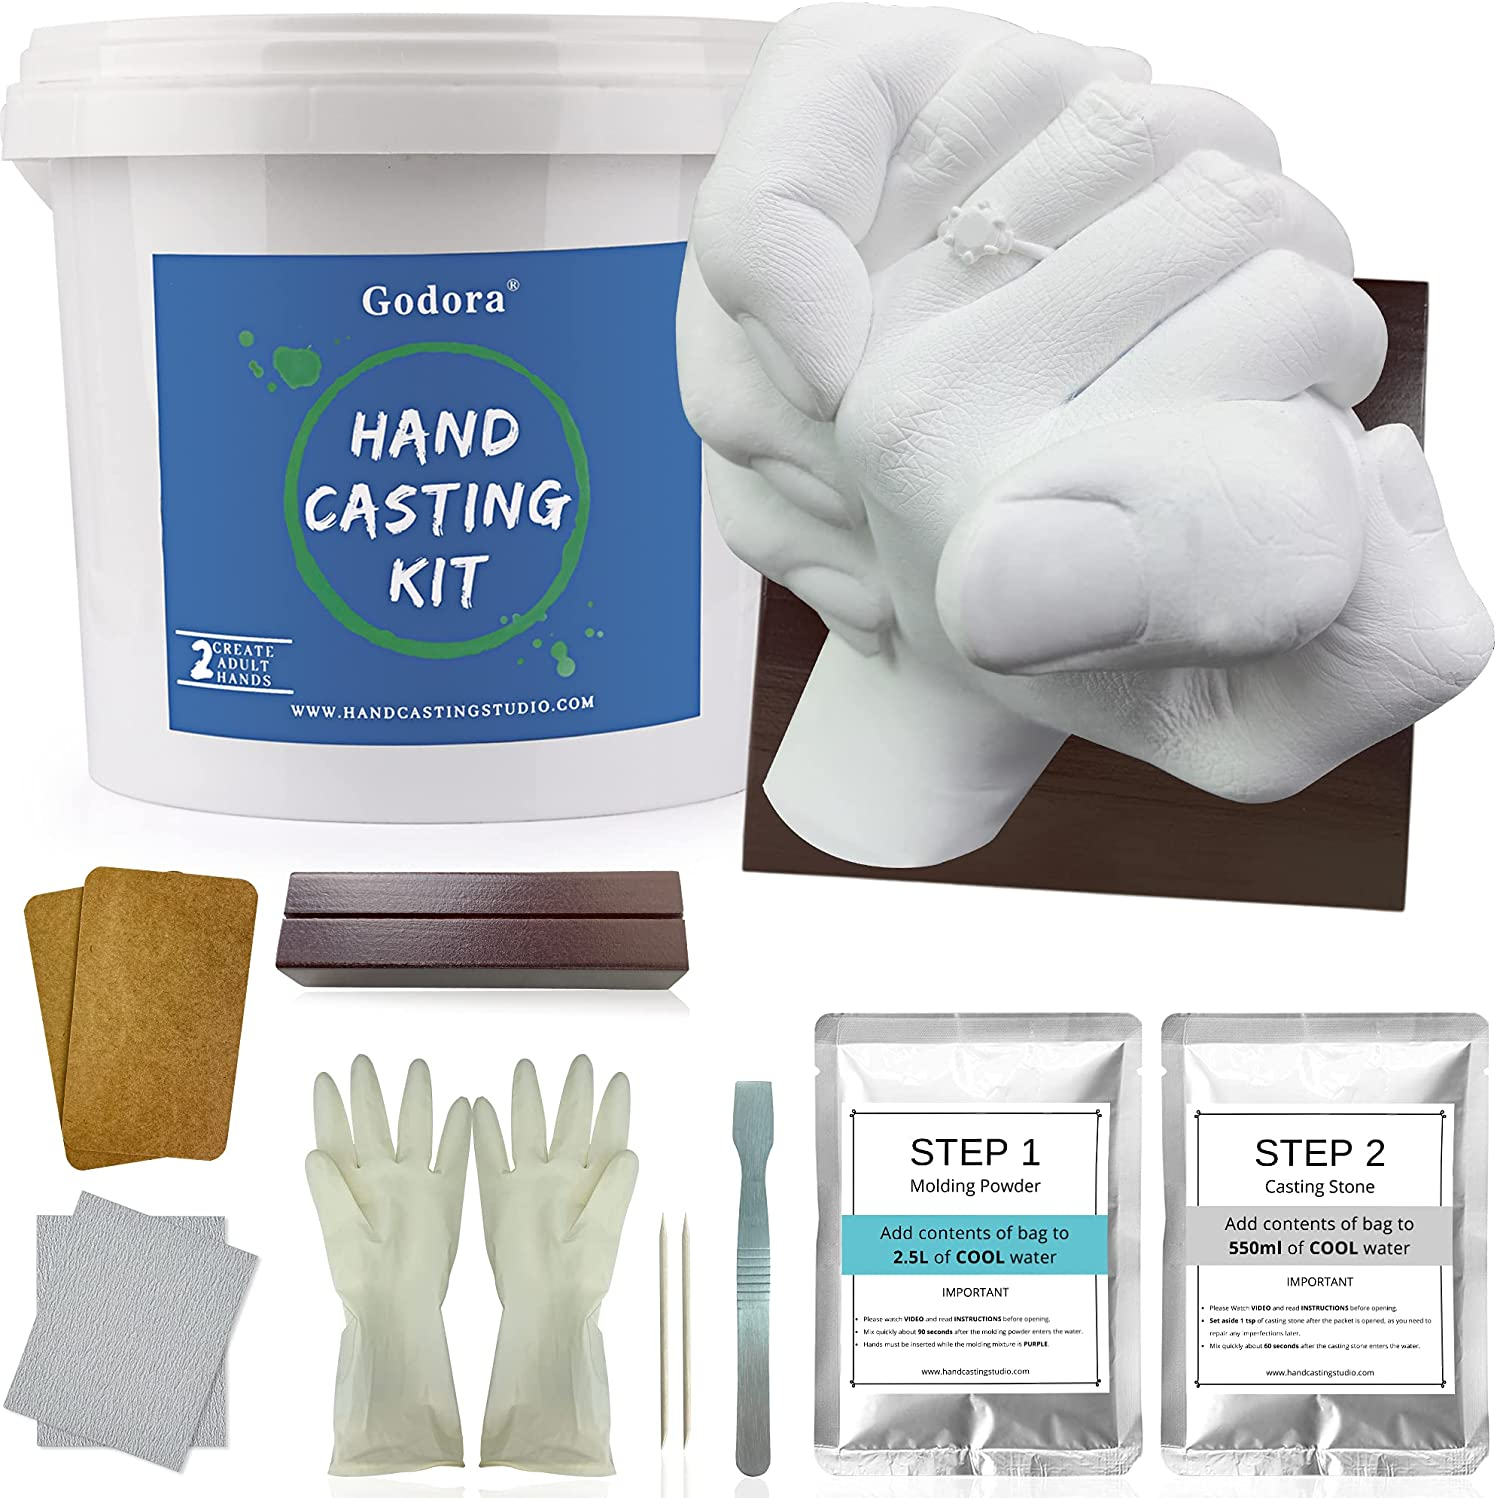 Hand Casting Kit Refill, Hand Casting Kit Couples Refill with Molding Powder & Casting Stone, Molding Kits Refill for 2 Adult Hands, Bucket Not Included.